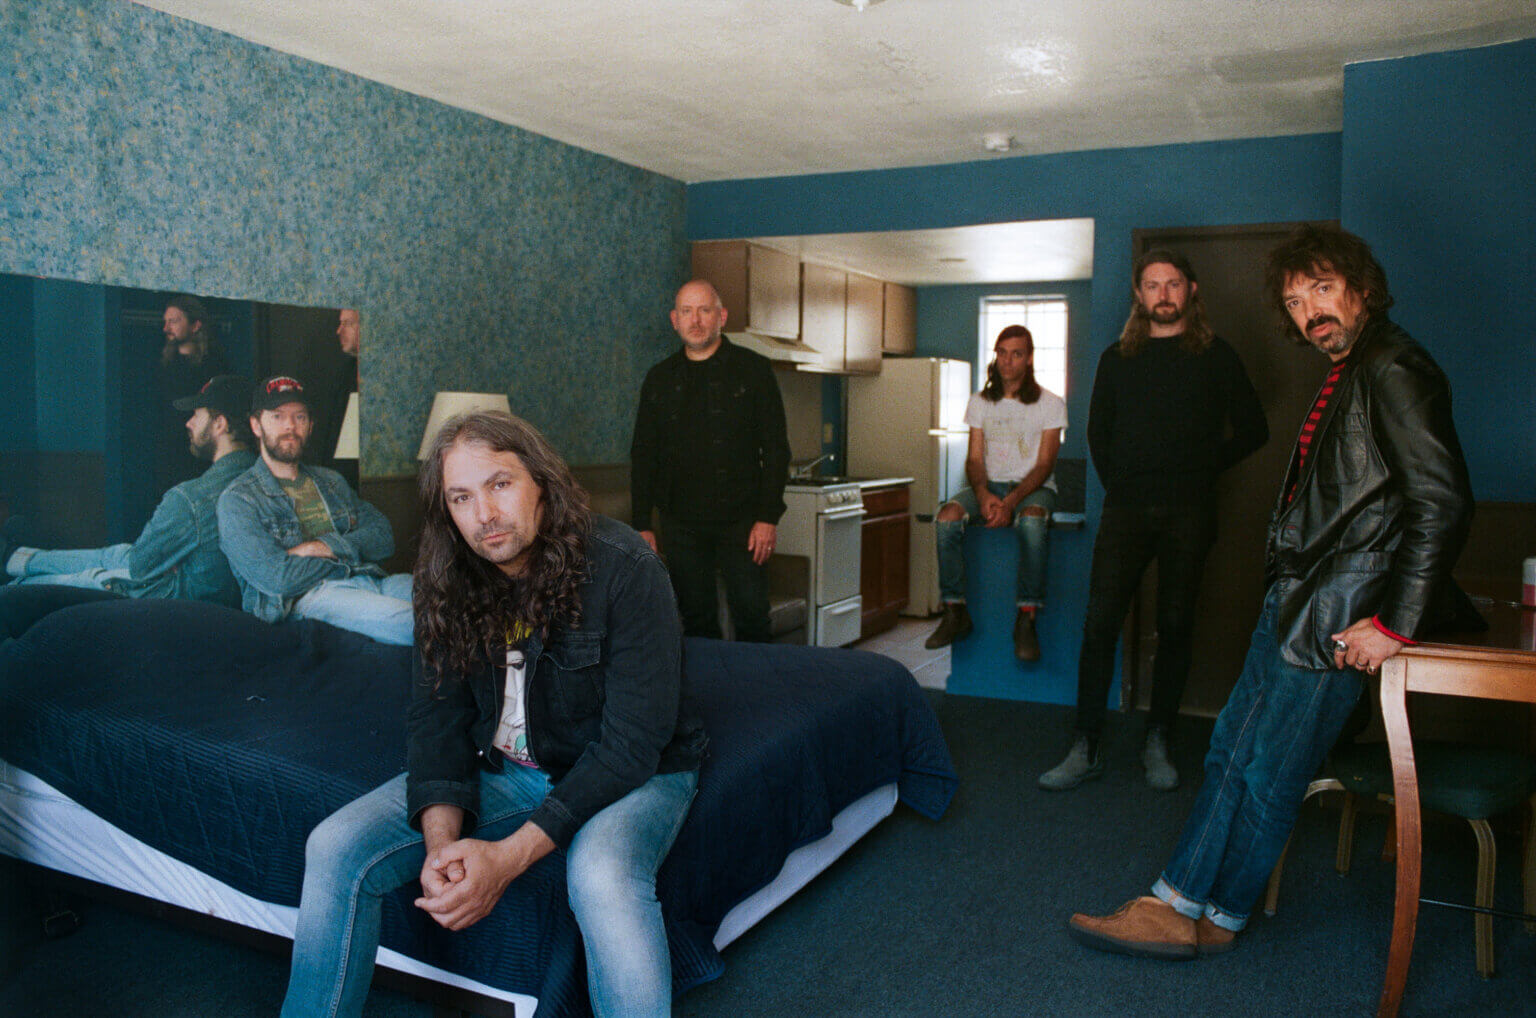 The War On Drugs have shared "Care." The final single off the band's Album I Don’t Live Here Anymore, which drops on October 29, 2021